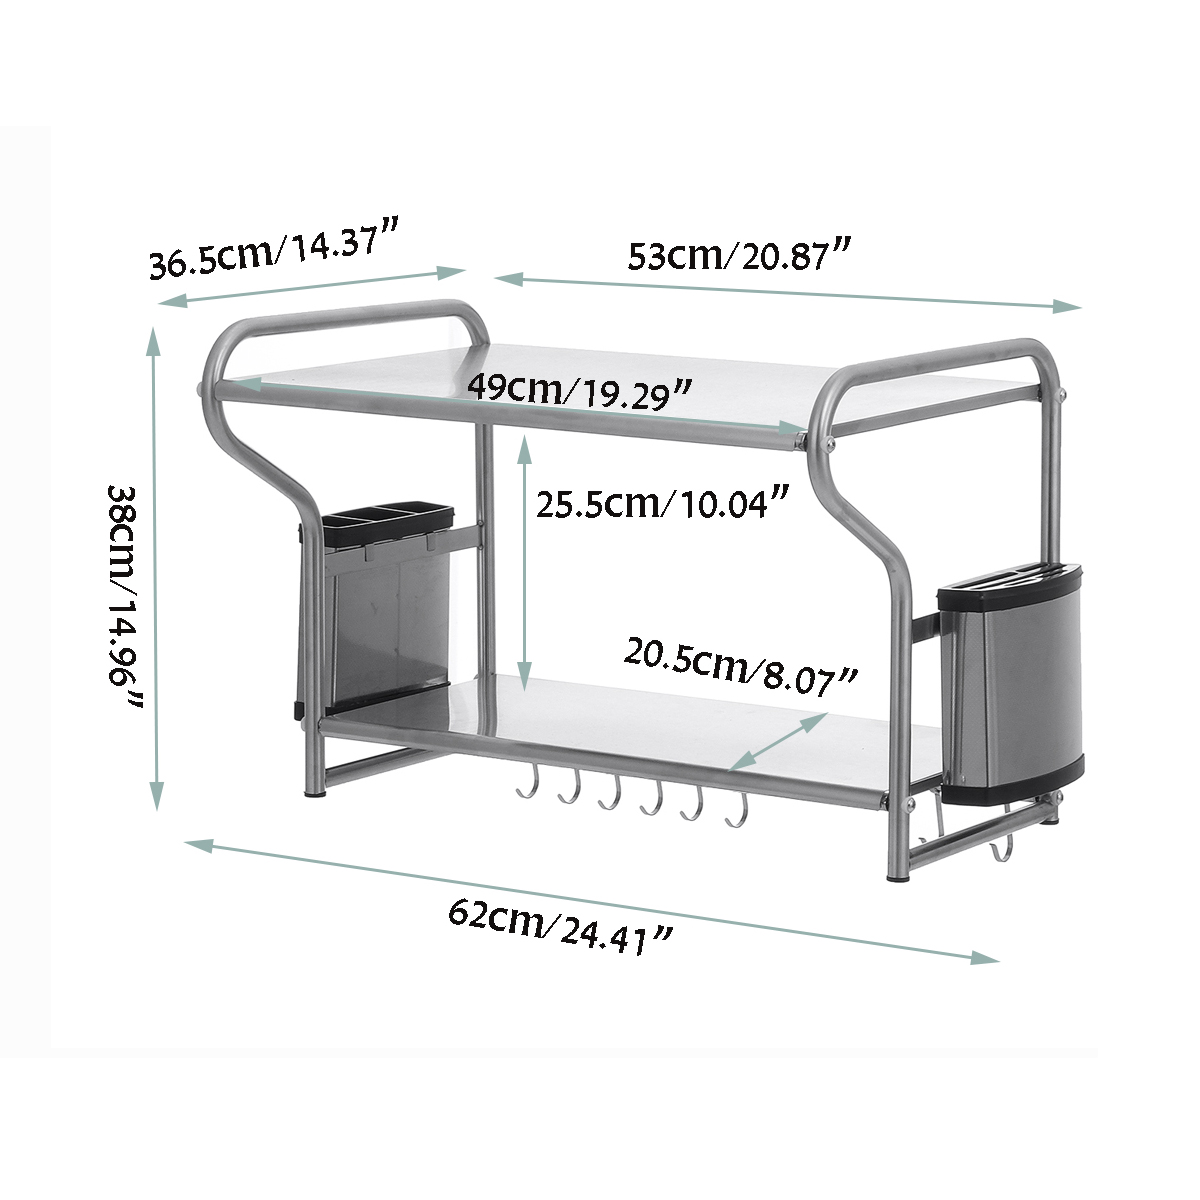 Microwave-Oven-Rack-Kitchen-Stainless-Steel-Wall-Bracket-Shelf-Holder-With-Hooks-1740073